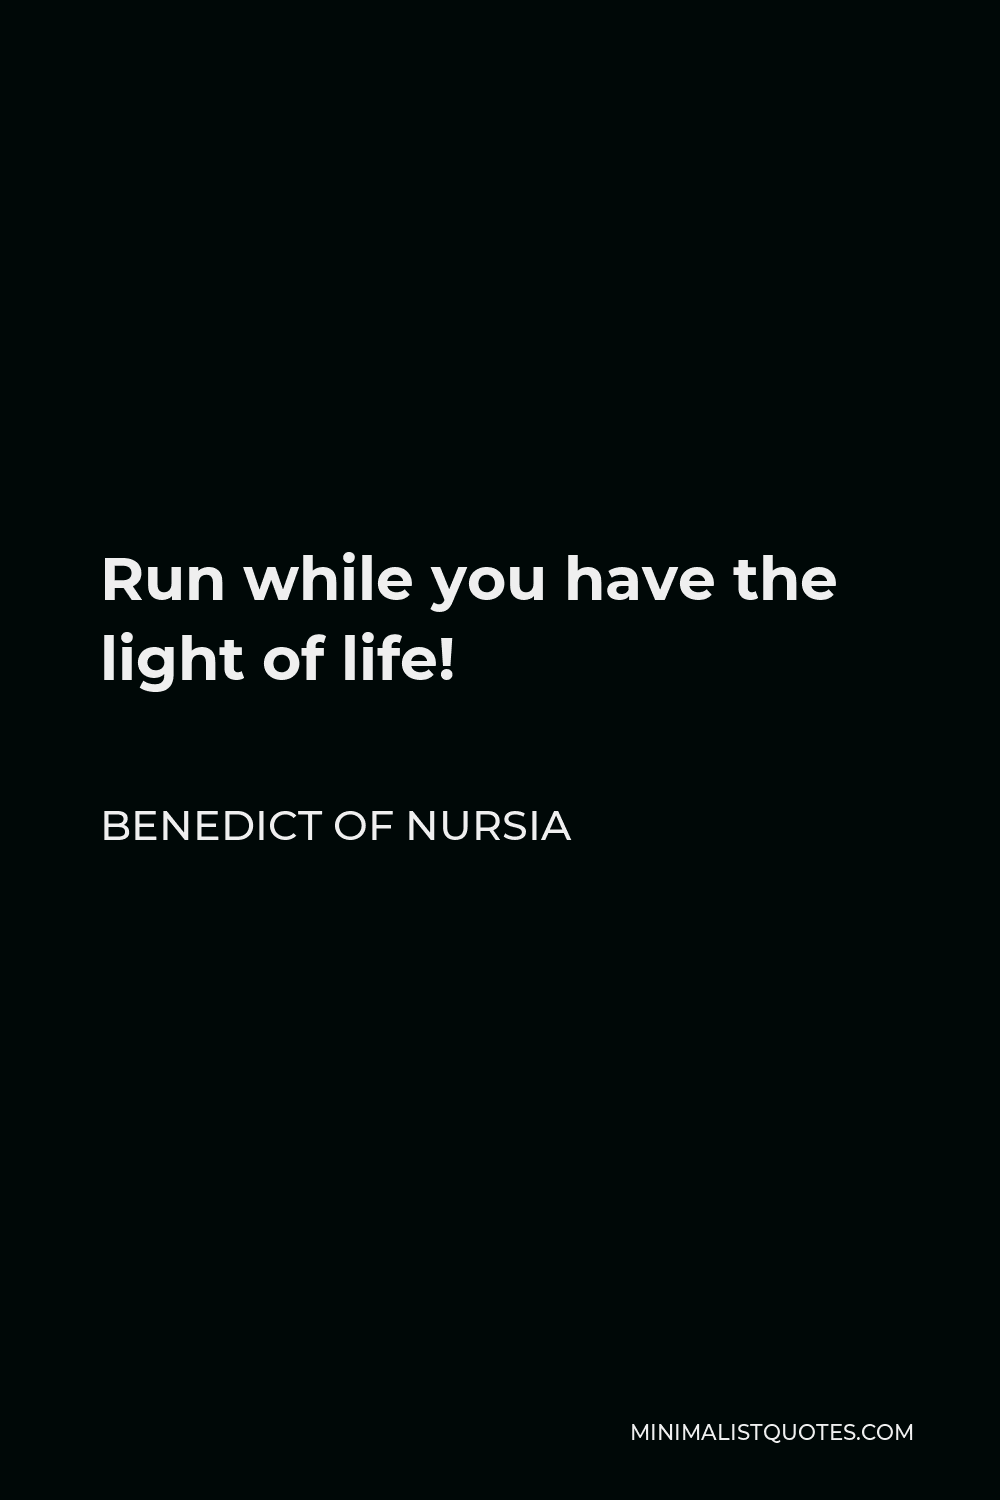 Benedict of Nursia Quote - Run while you have the light of life!